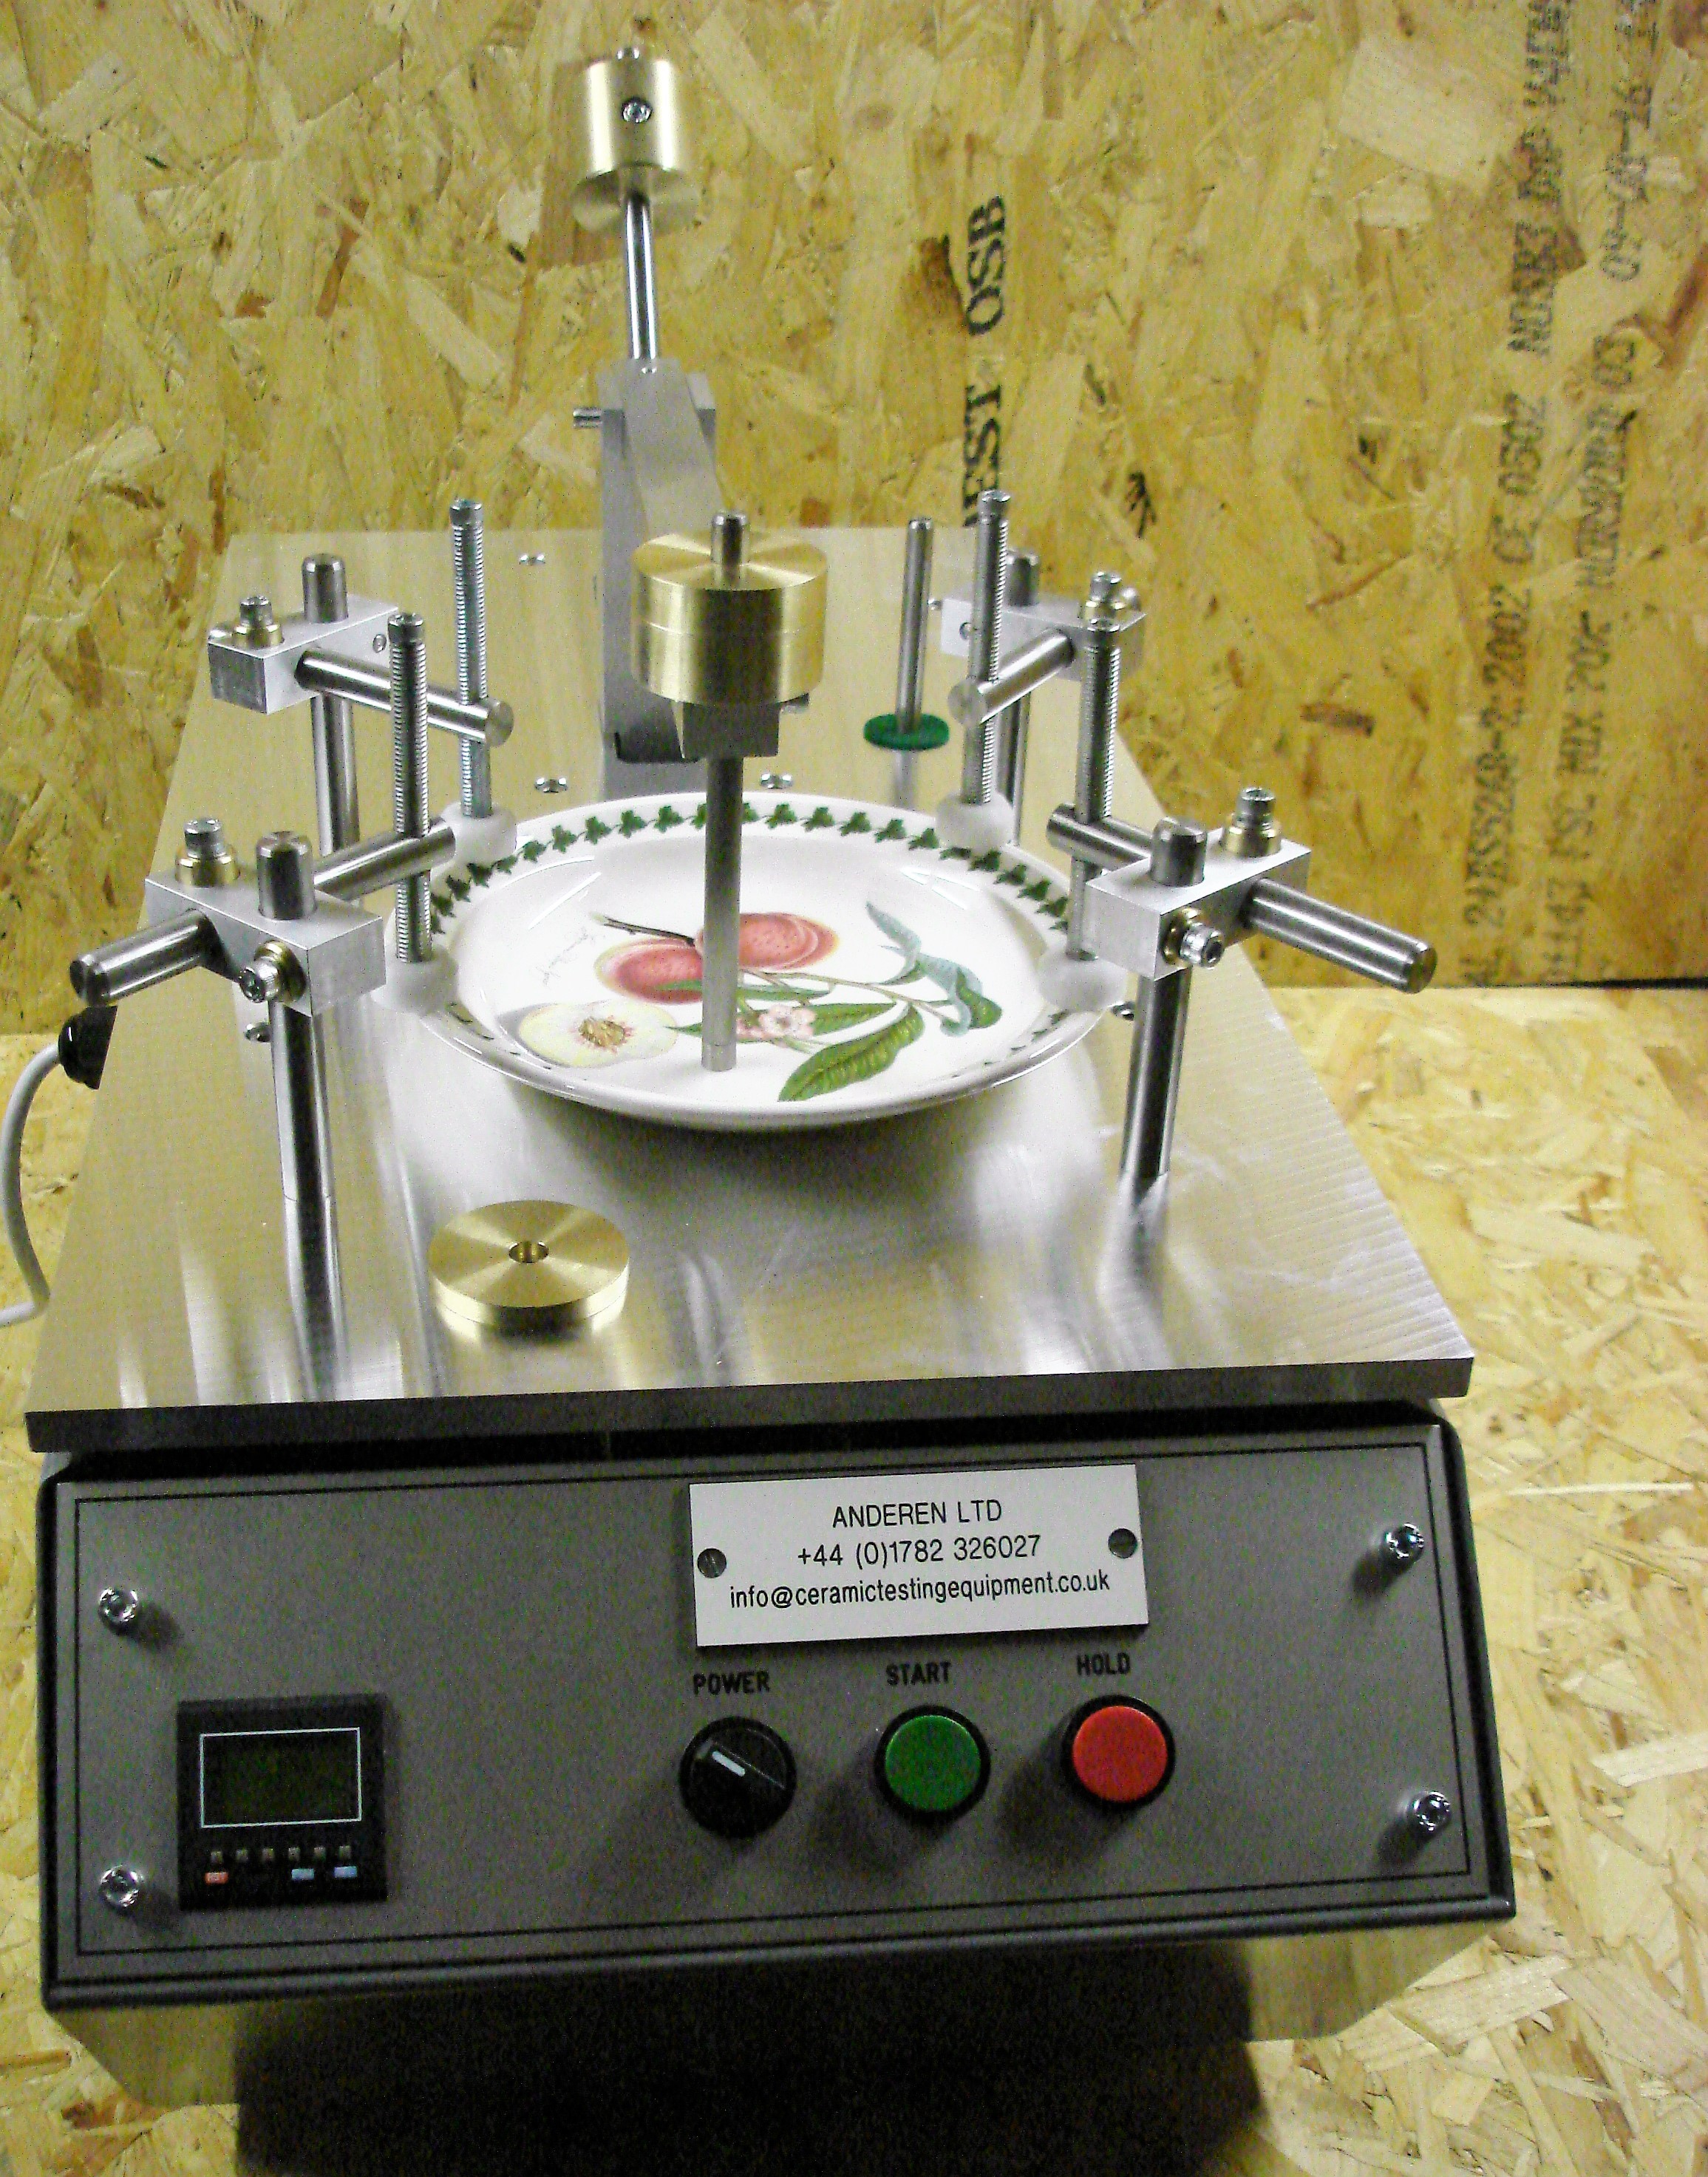 Pin Abrasion Tester - Ceramic test equipment for abrasion and metal marking resistance [AAT]